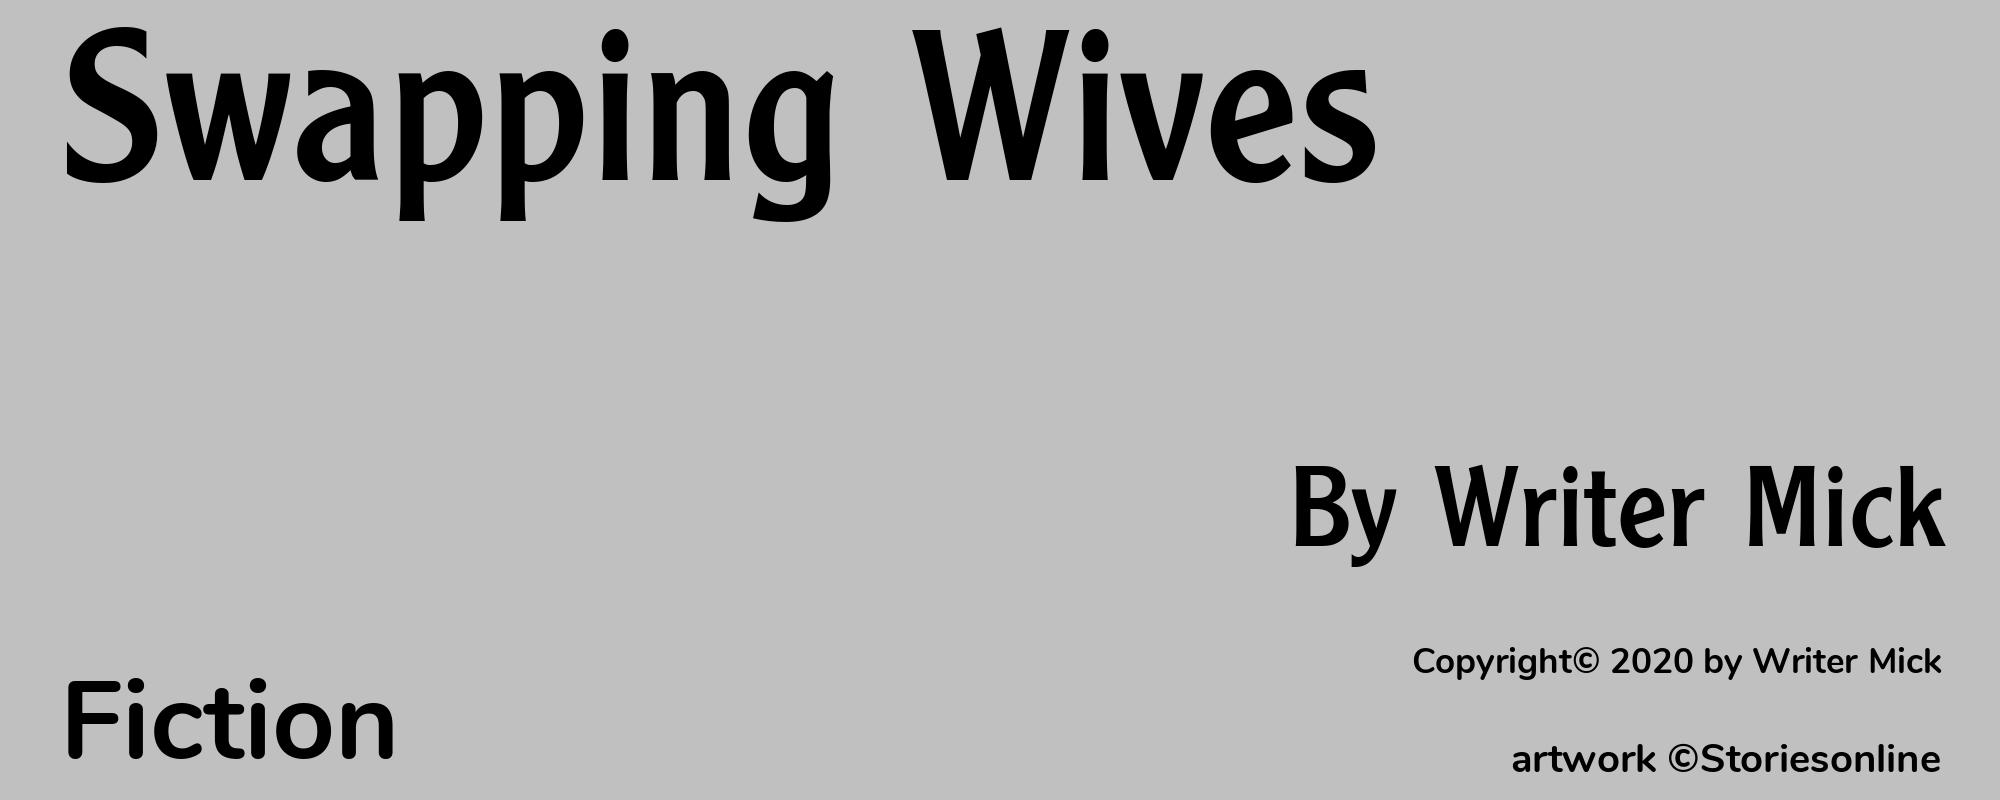 Swapping Wives - Cover